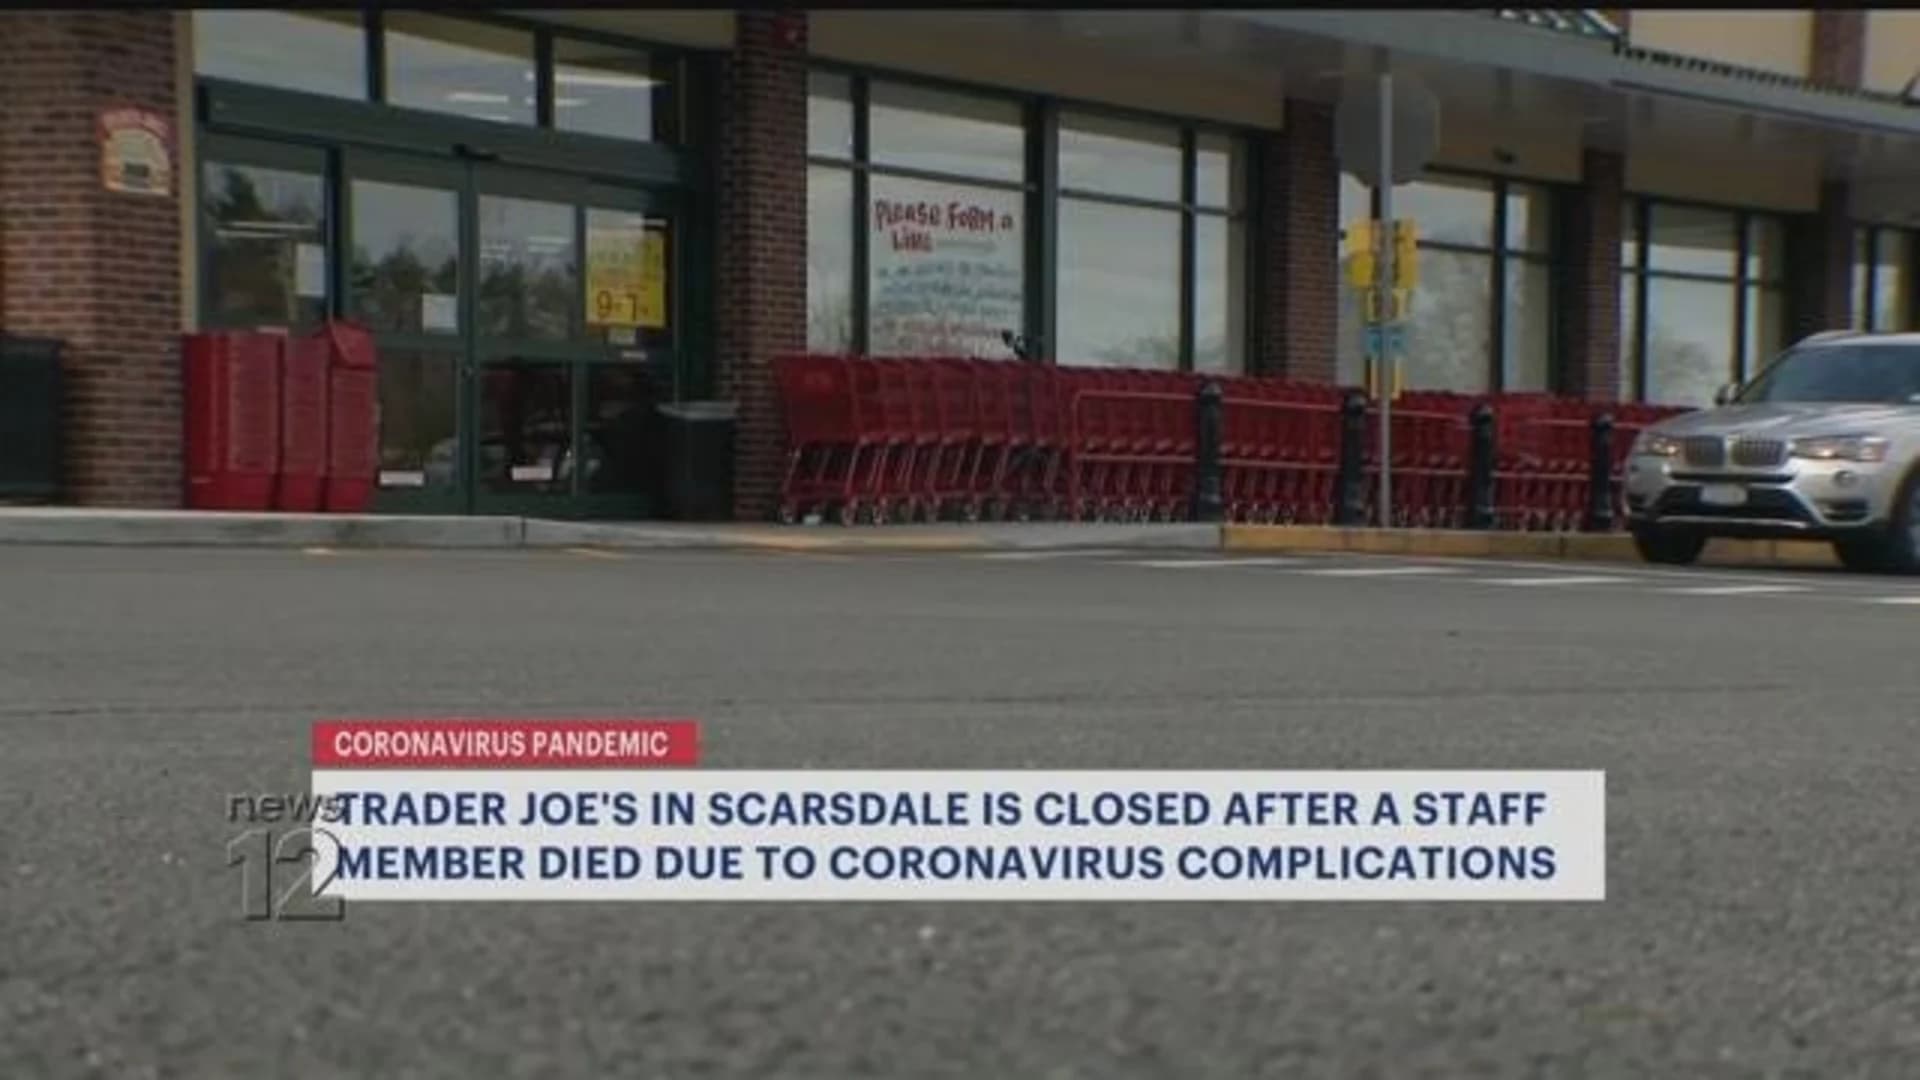 Scarsdale Trader Joe’s temporarily closes after staff member death